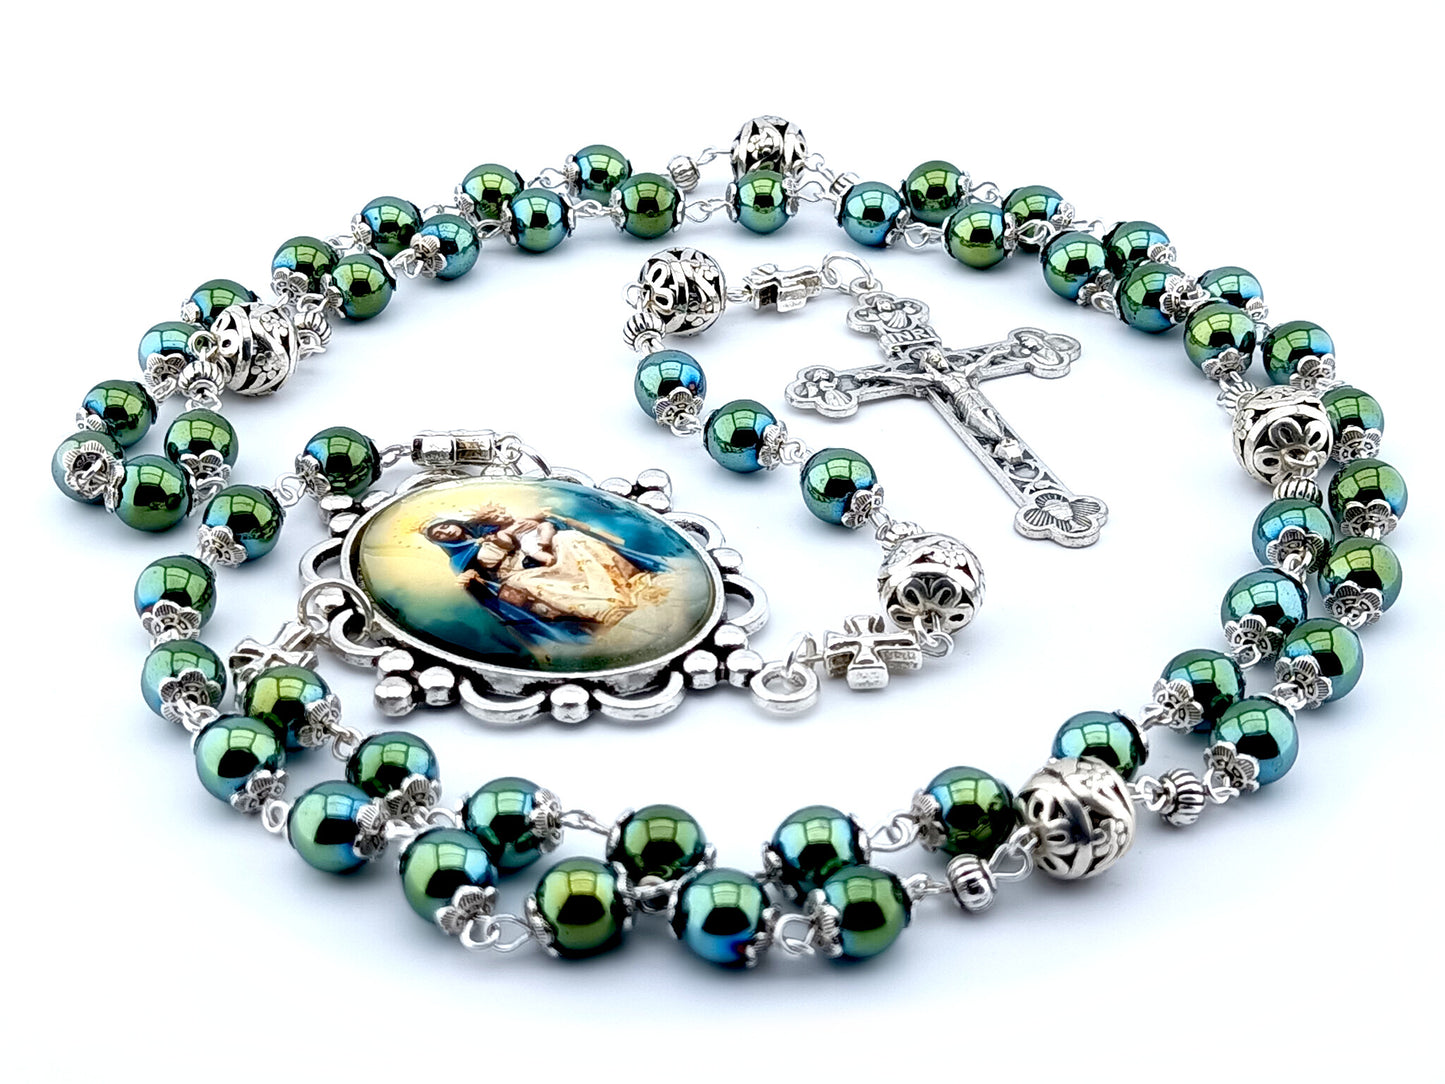 Our Lady of Mount Carmel unique rosary beads with blue green hematite gemstone beads, silver pater beads, crucifix and picture centre medal.